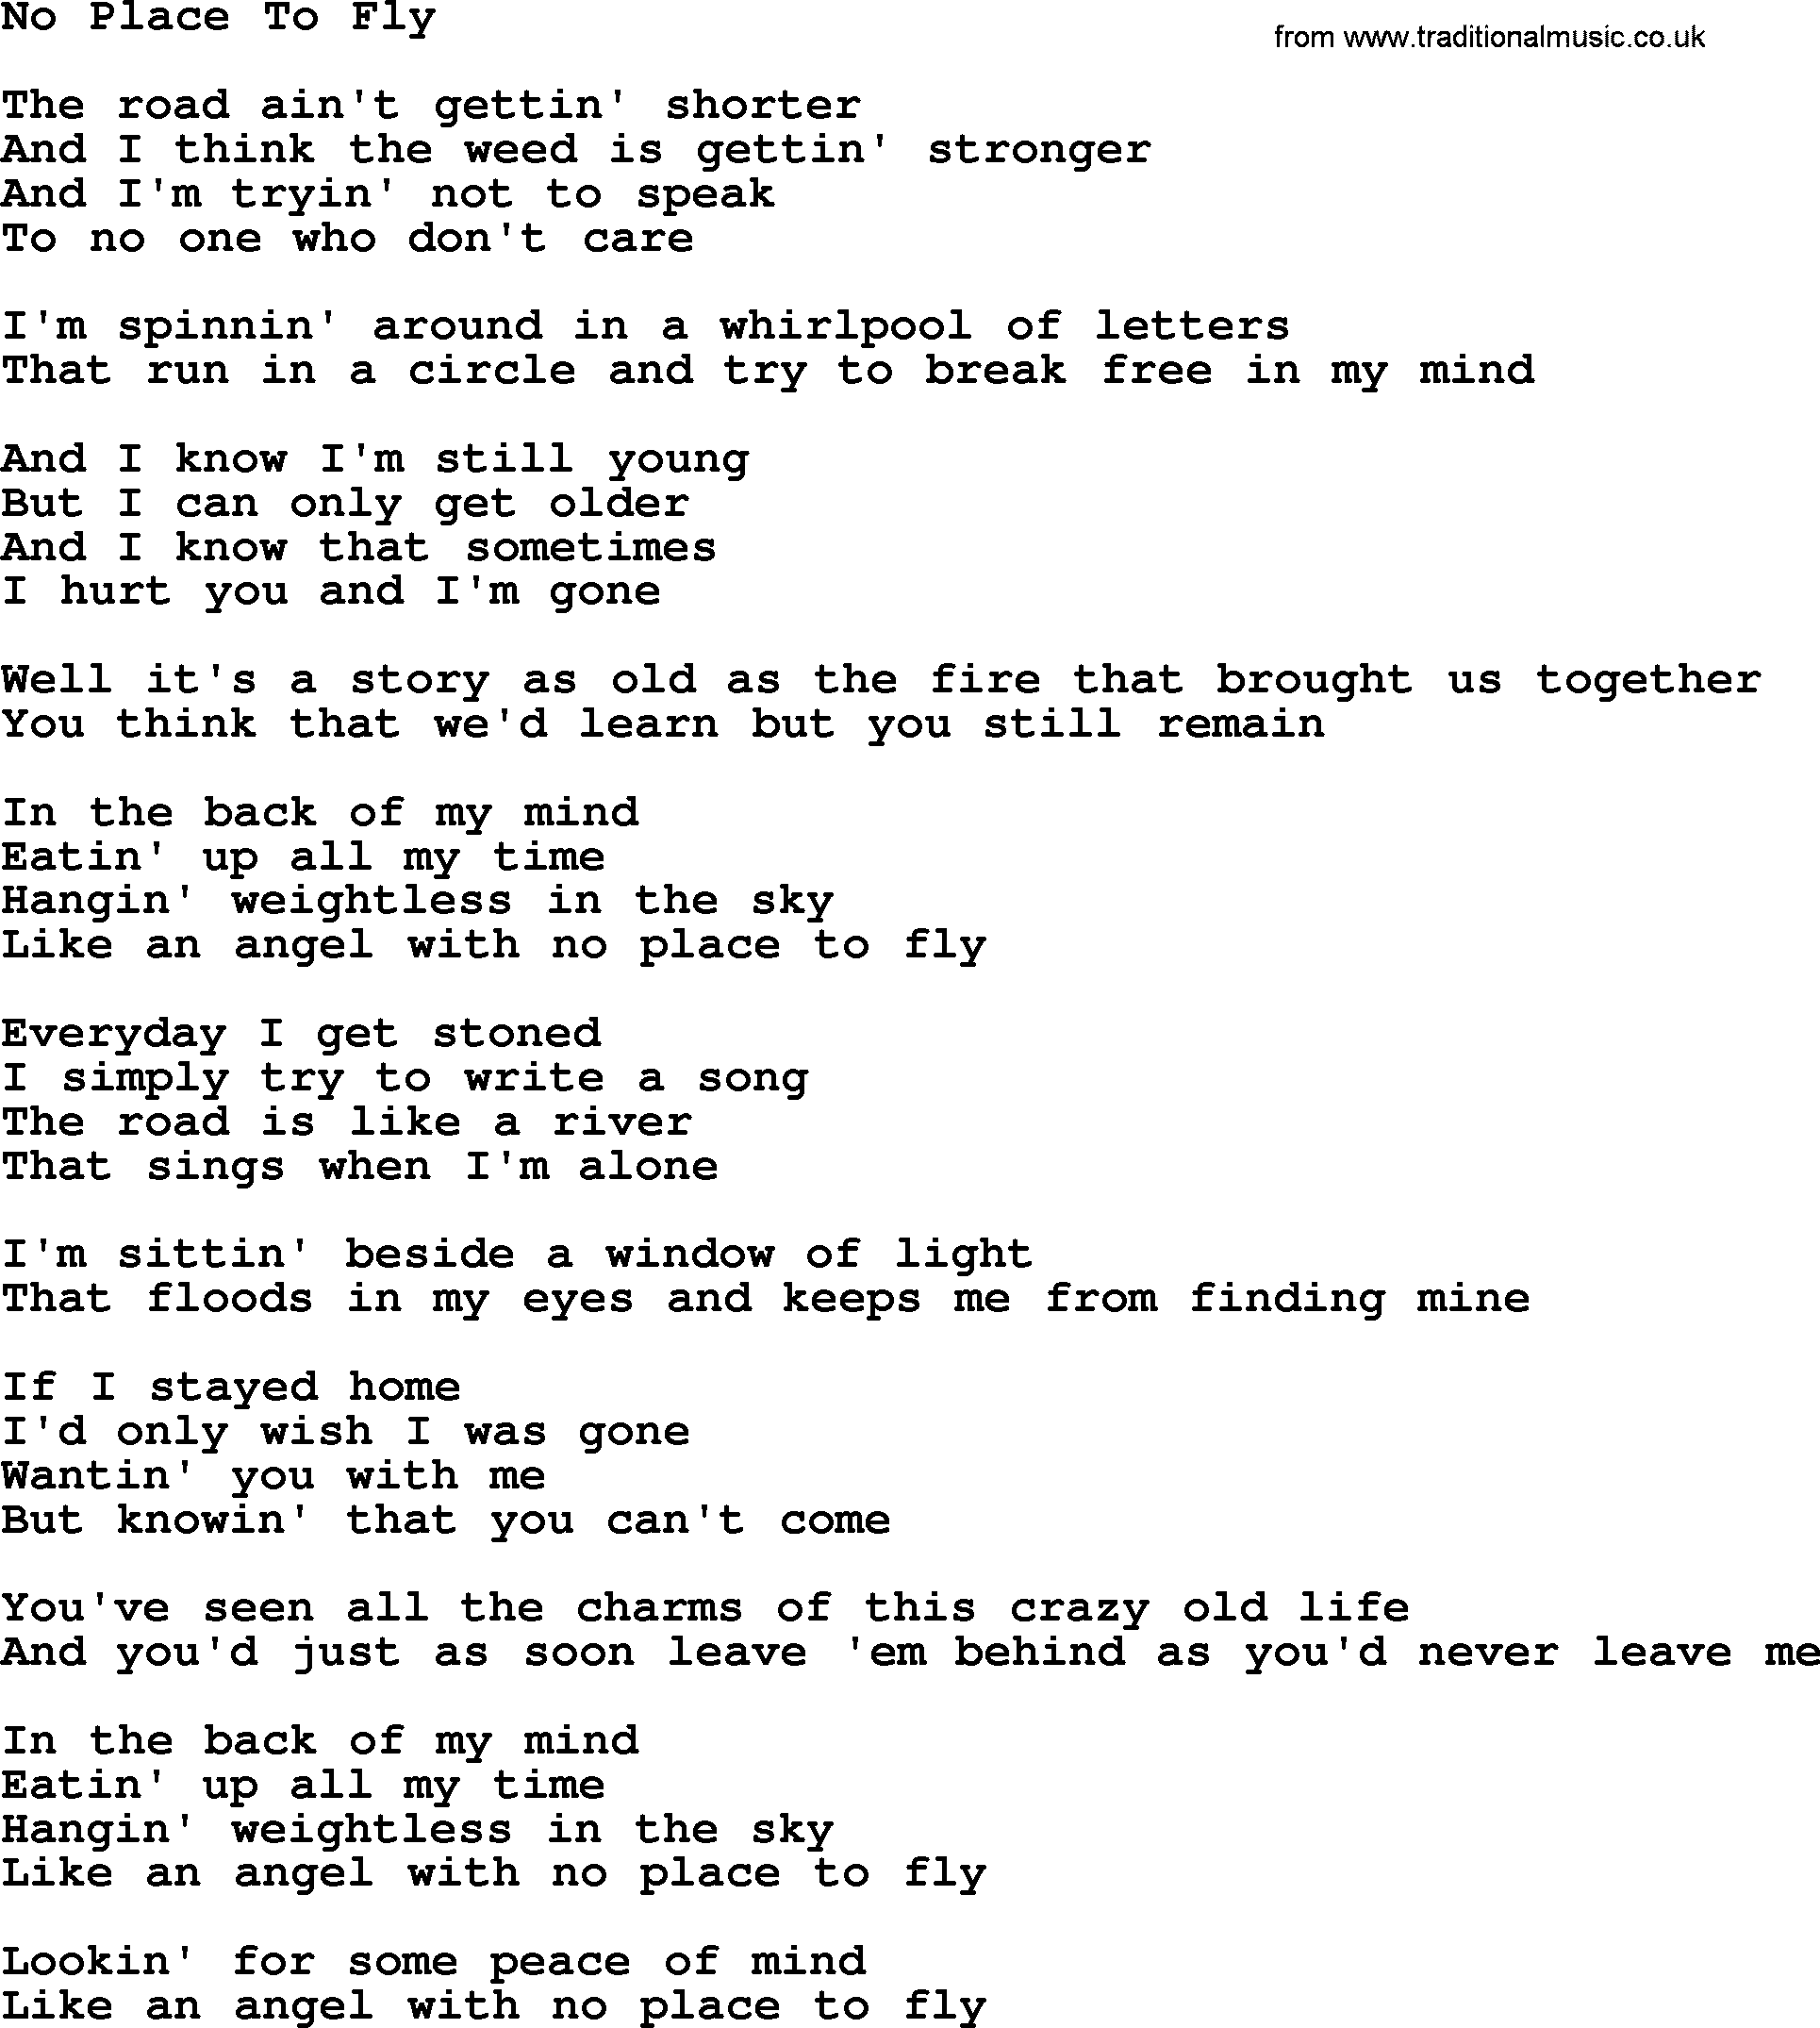 Willie Nelson song: No Place To Fly, lyrics